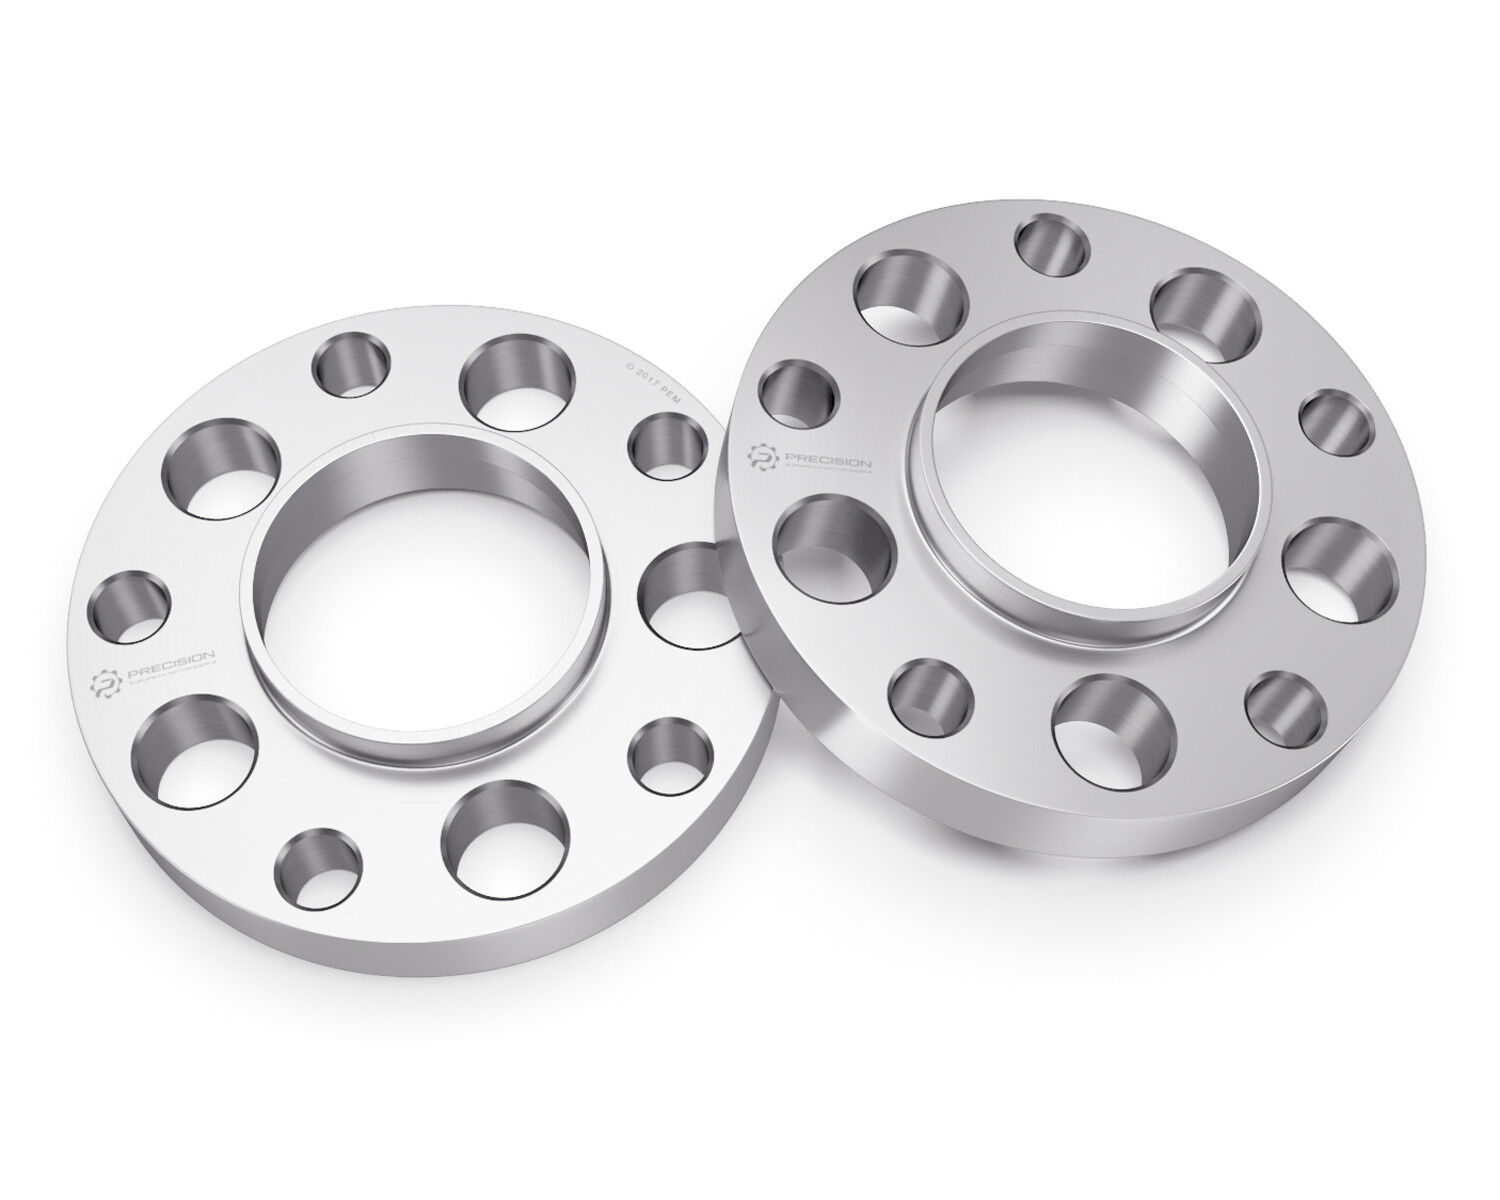 15mm Billet Hubcentric Mercedes Benz Wheel Spacers 5x112 - CB 66.6 / 66.56 Bore